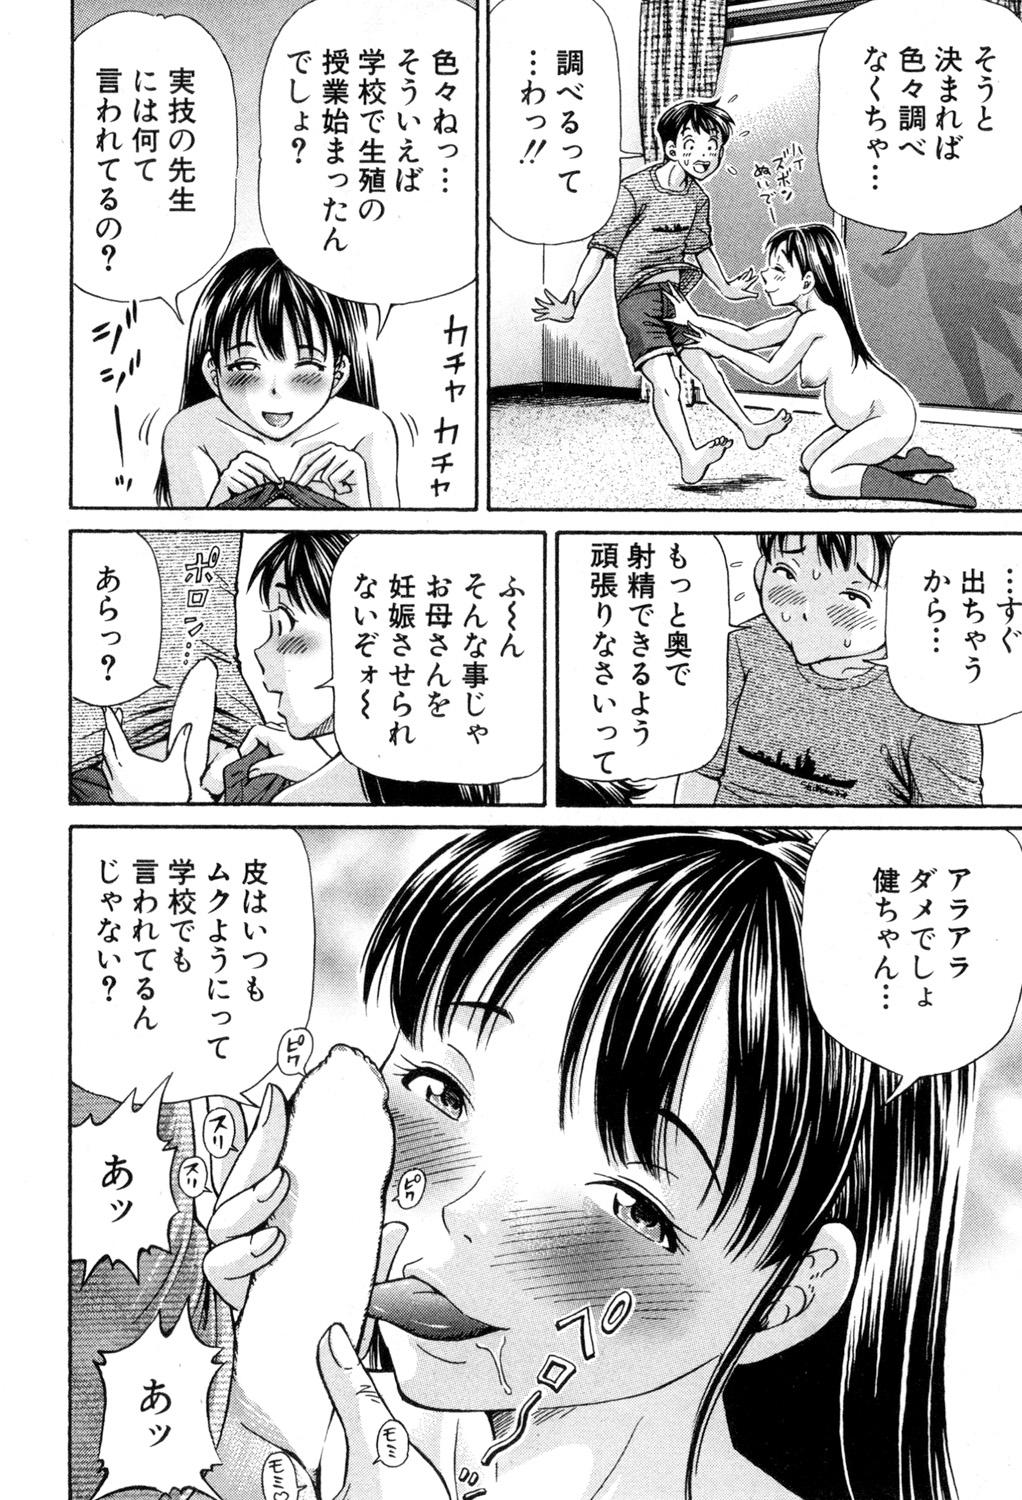 BUSTER COMIC 2015-09 206